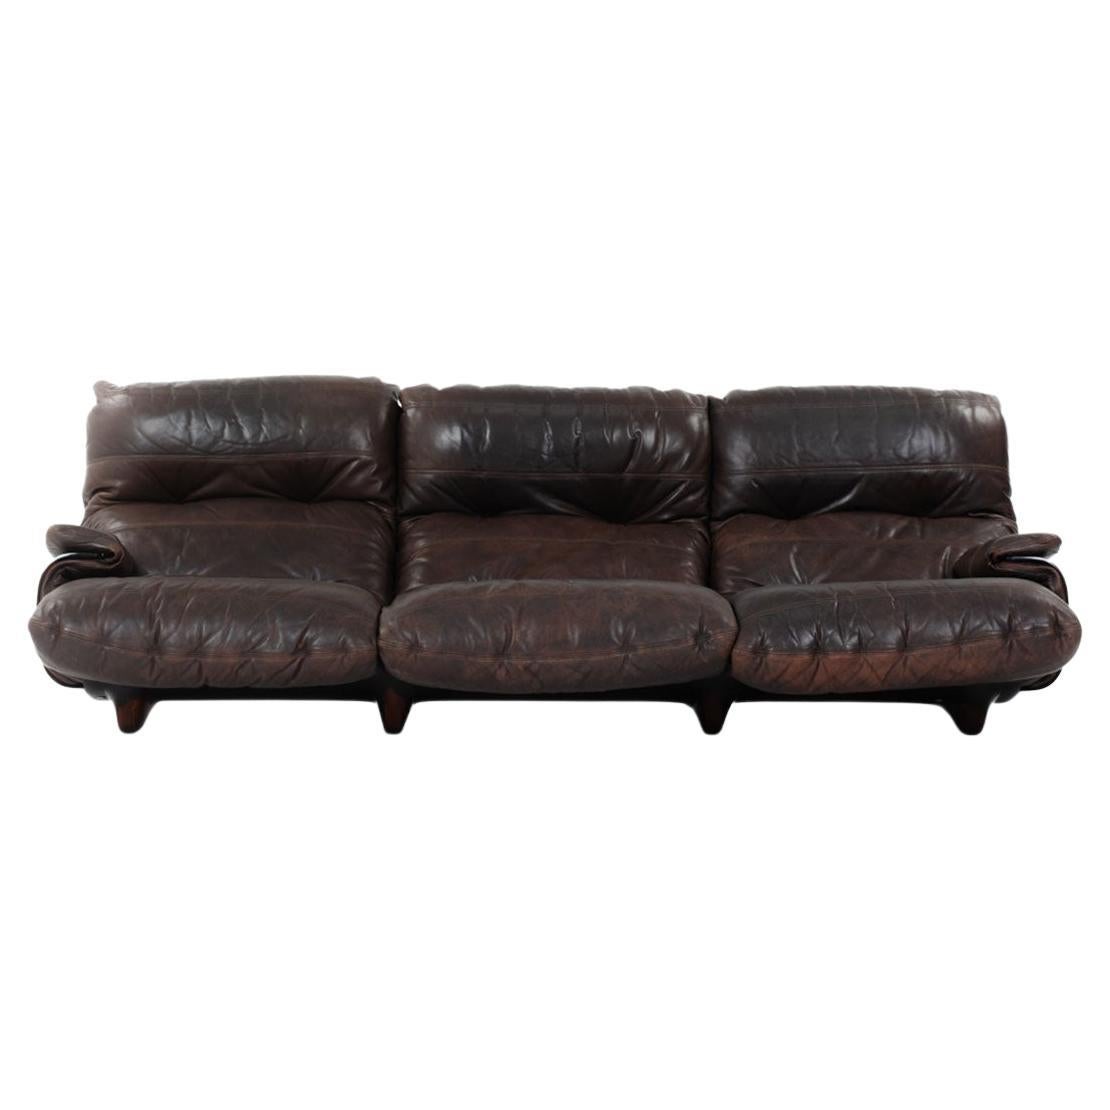 Marsala 3-Seat Sofa Brown Leather by Michel Ducaroy for Ligne Roset, 1970